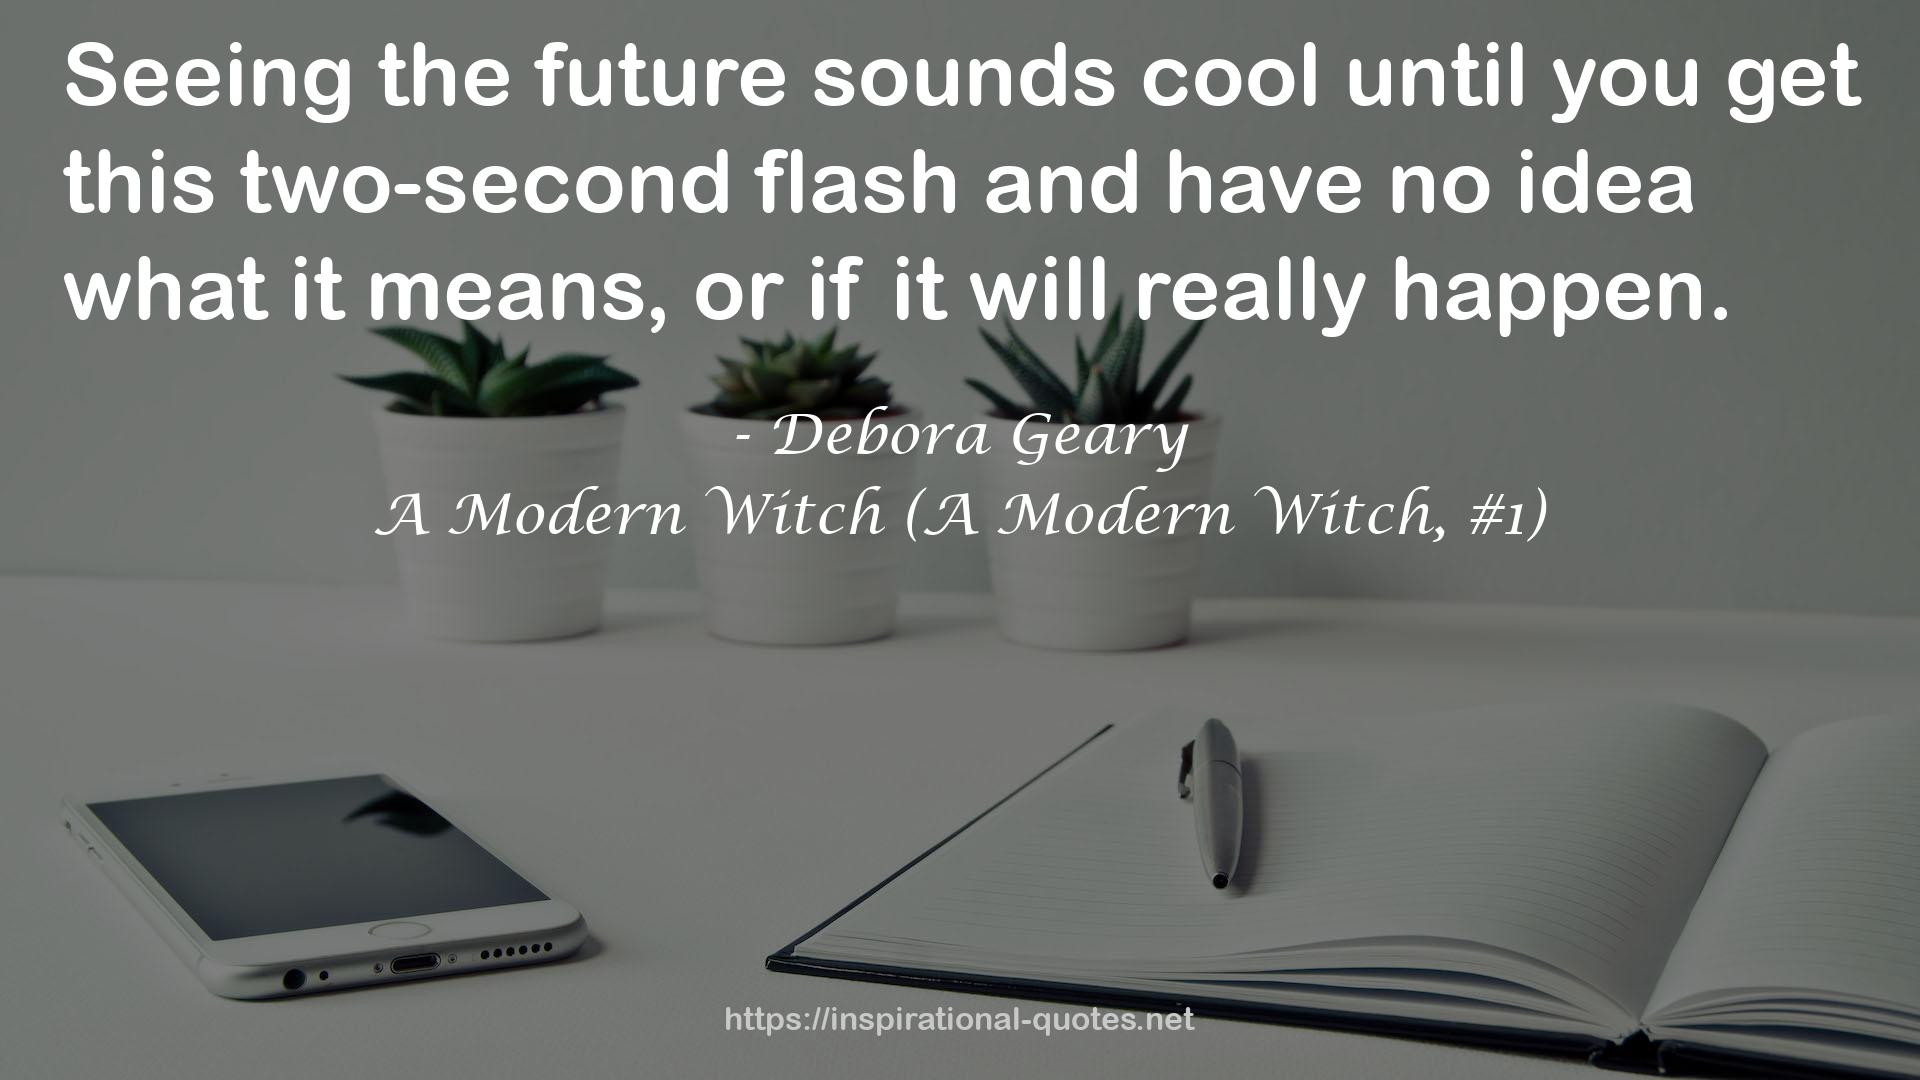 A Modern Witch (A Modern Witch, #1) QUOTES